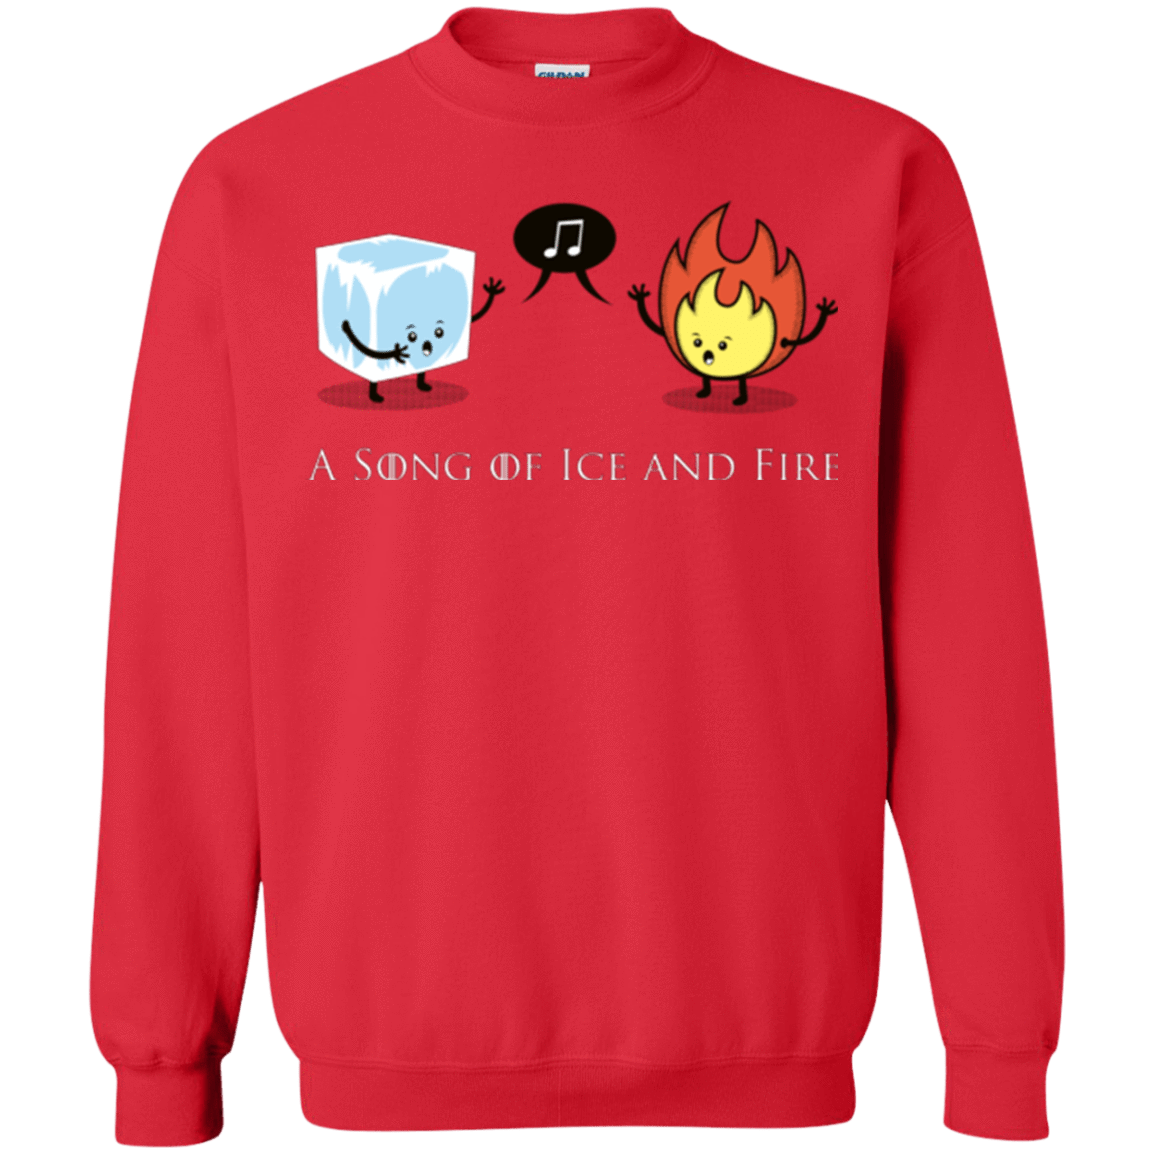 Sweatshirts Red / Small A Song of Ice and Fire Crewneck Sweatshirt